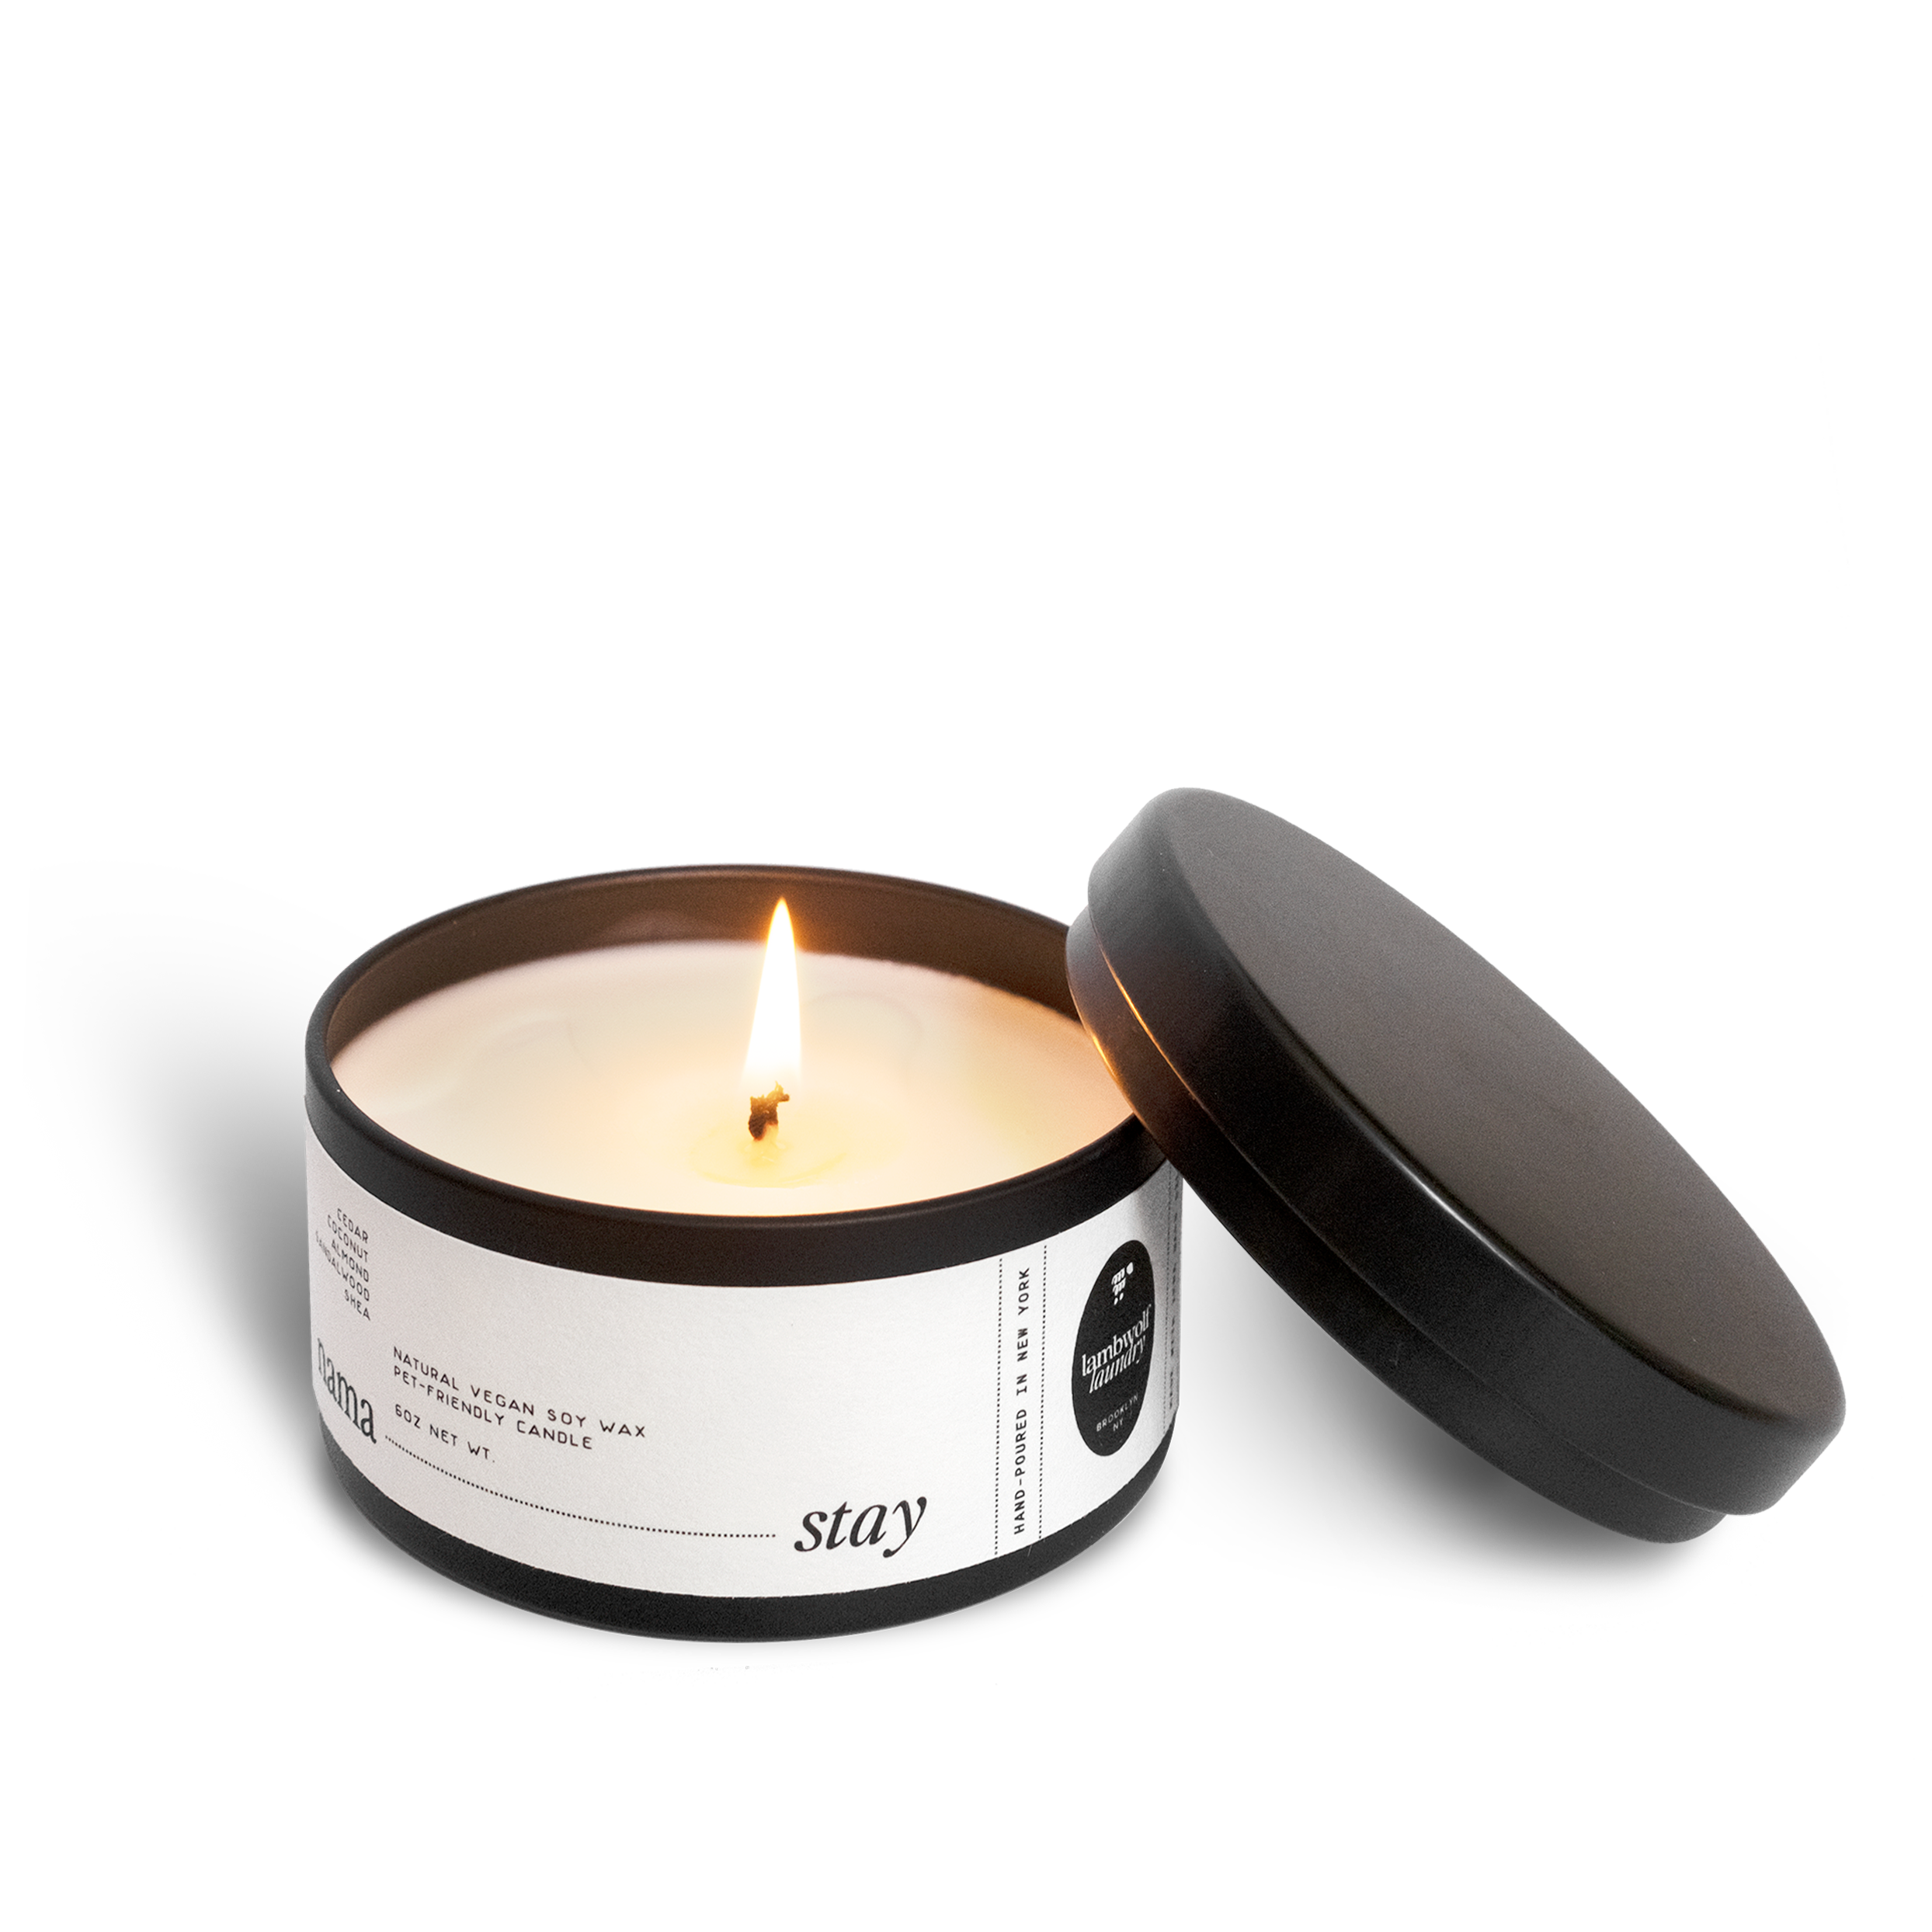 NAMA STAY Candle// Made in NY //Dog-Friendly Scent